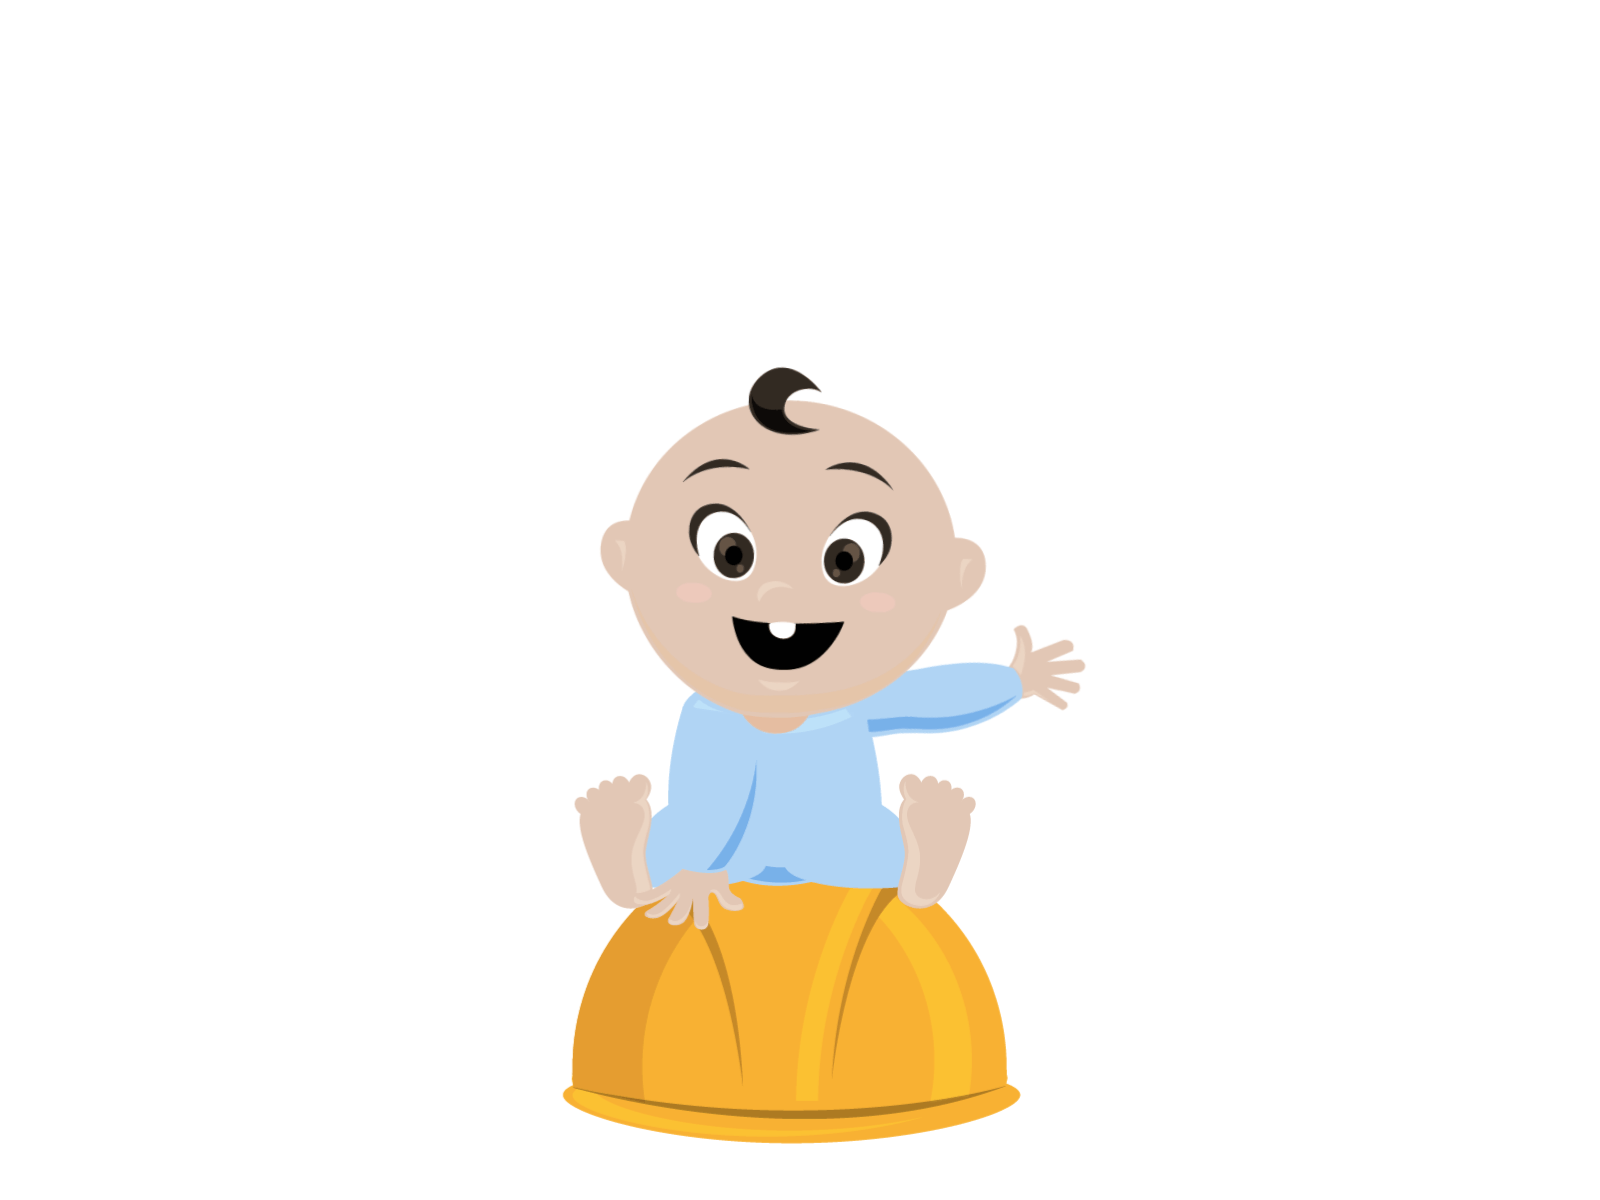 Little Johnny Character Animation by Dami Ojetunji on Dribbble